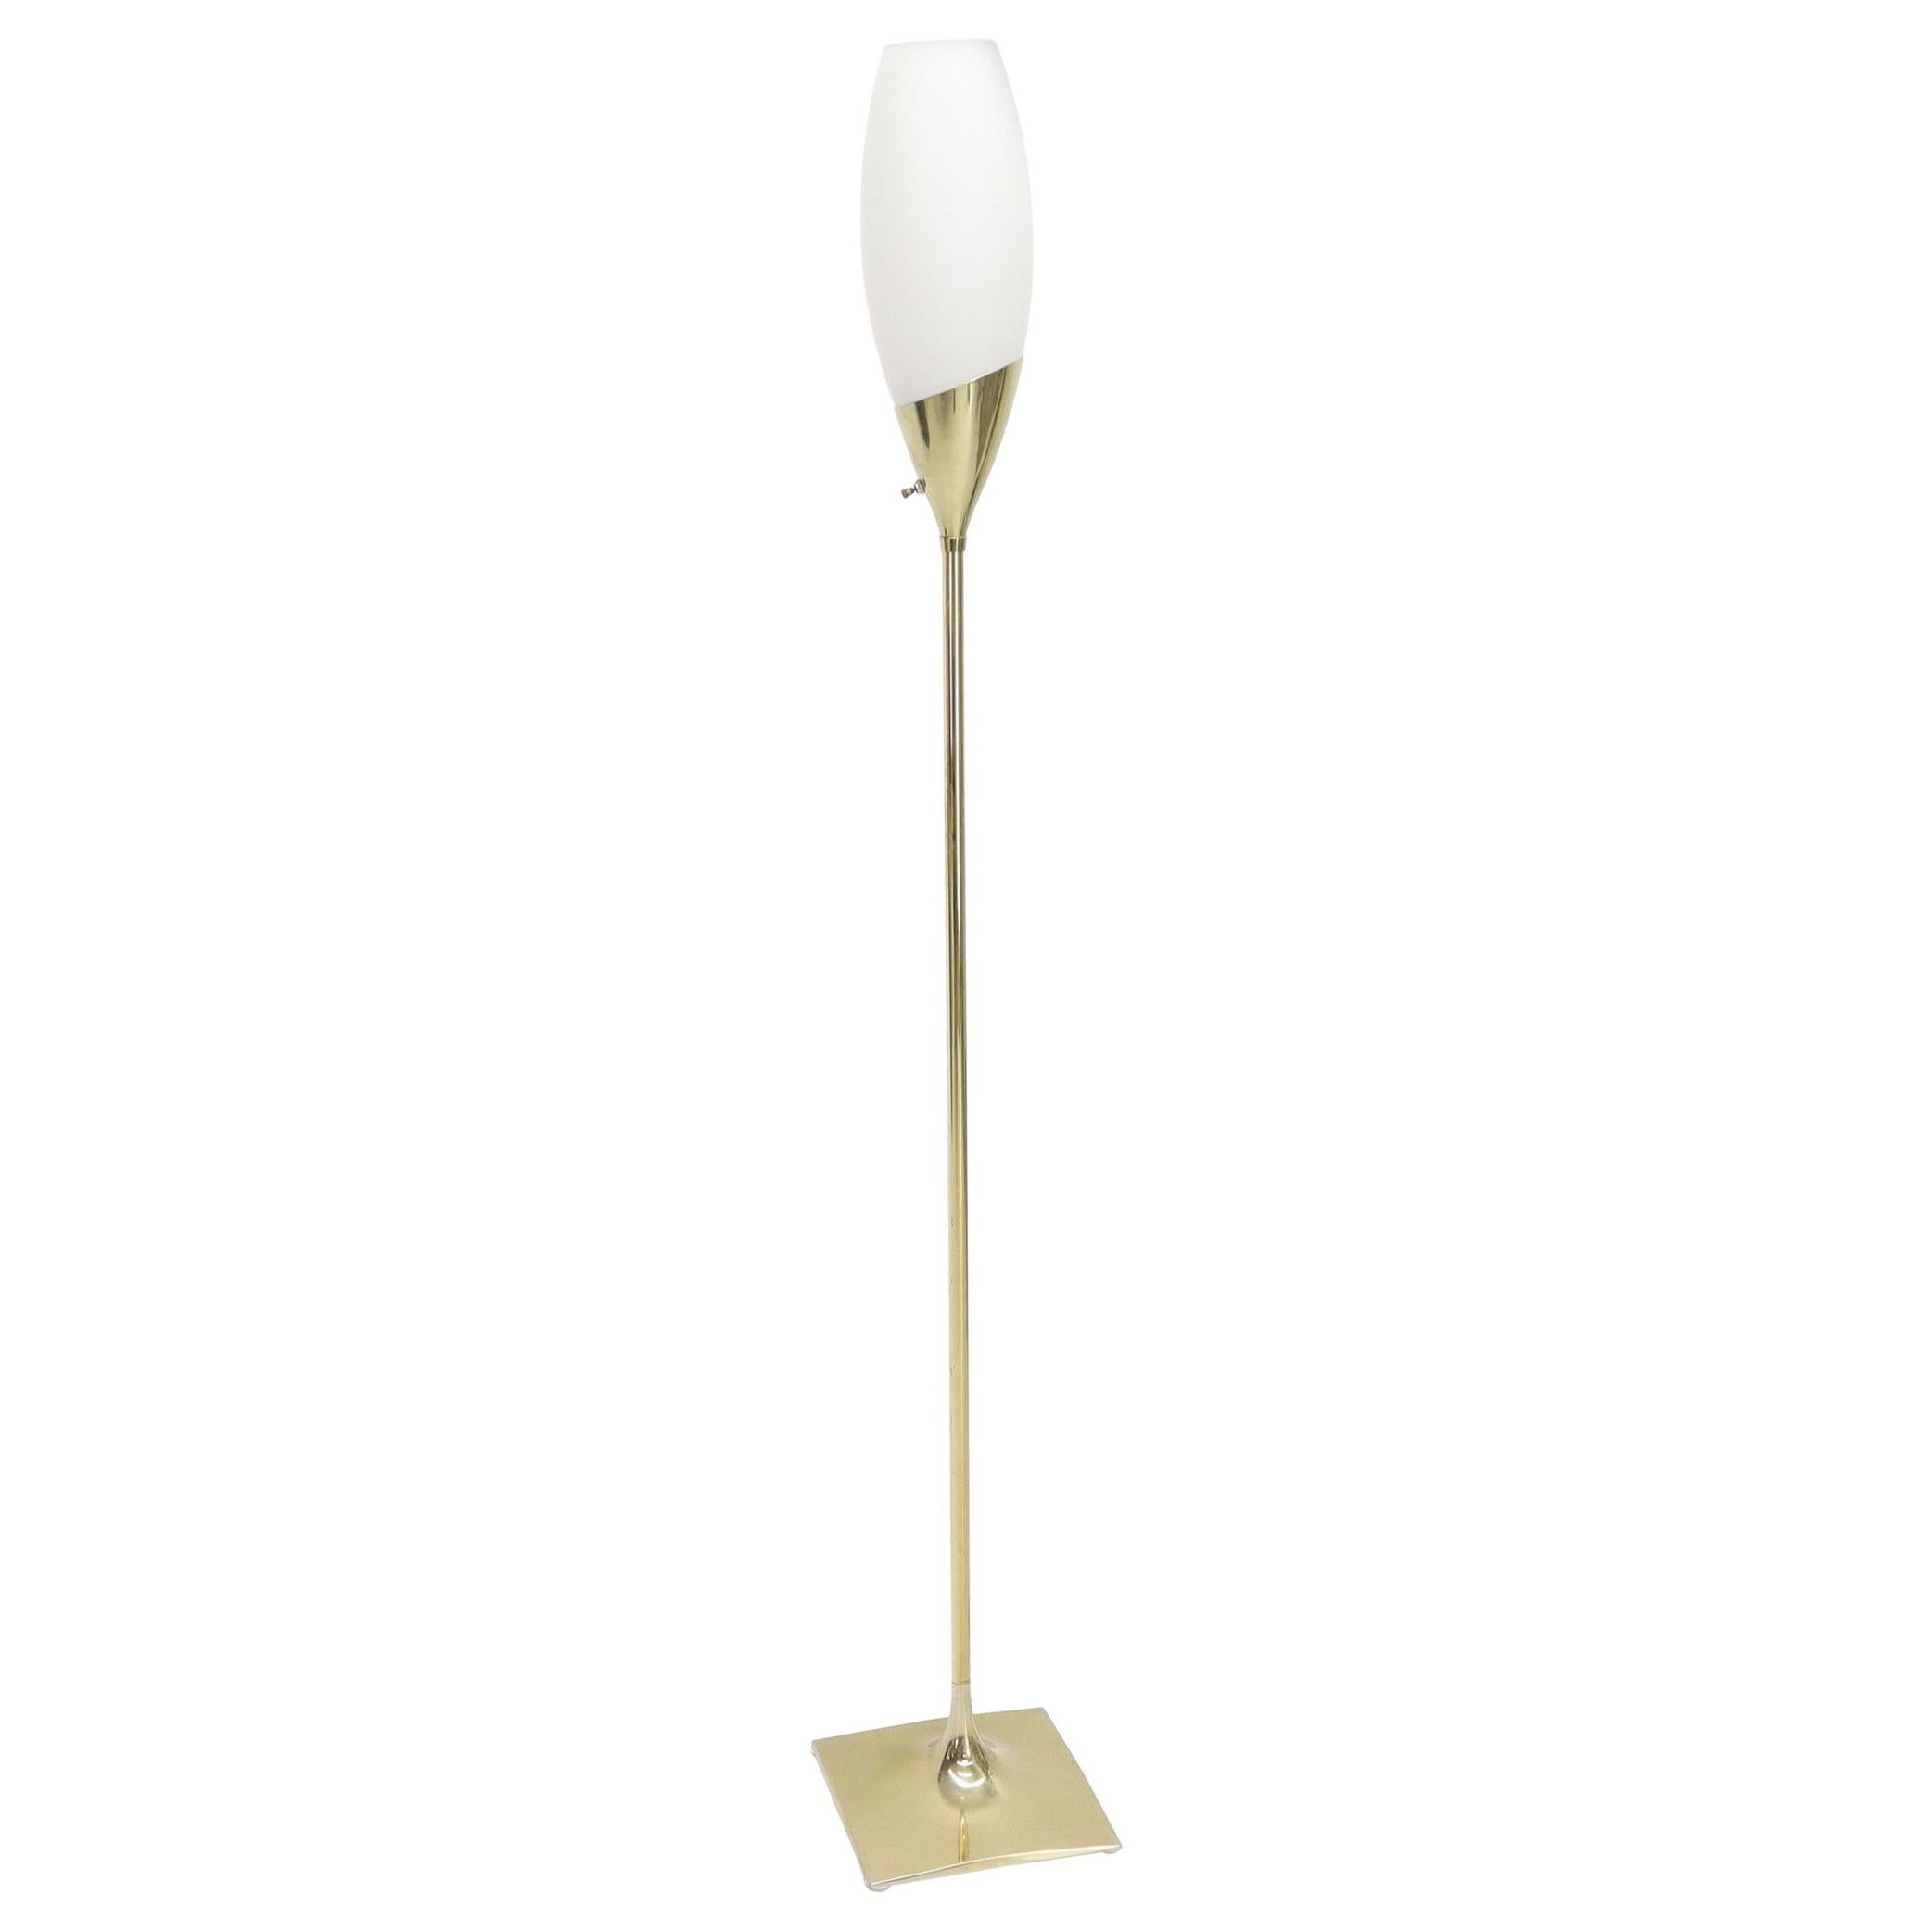 Square Tulip Base Champagne Or Wine Style White Frosted Glass Floor Lamp  For Sale At 1stdibs | Tulip Floor Lamp, Wine Glass Floor Lamp, Tulip Shaped Floor  Lamps Pertaining To Frosted Glass Floor Lamps (View 16 of 20)